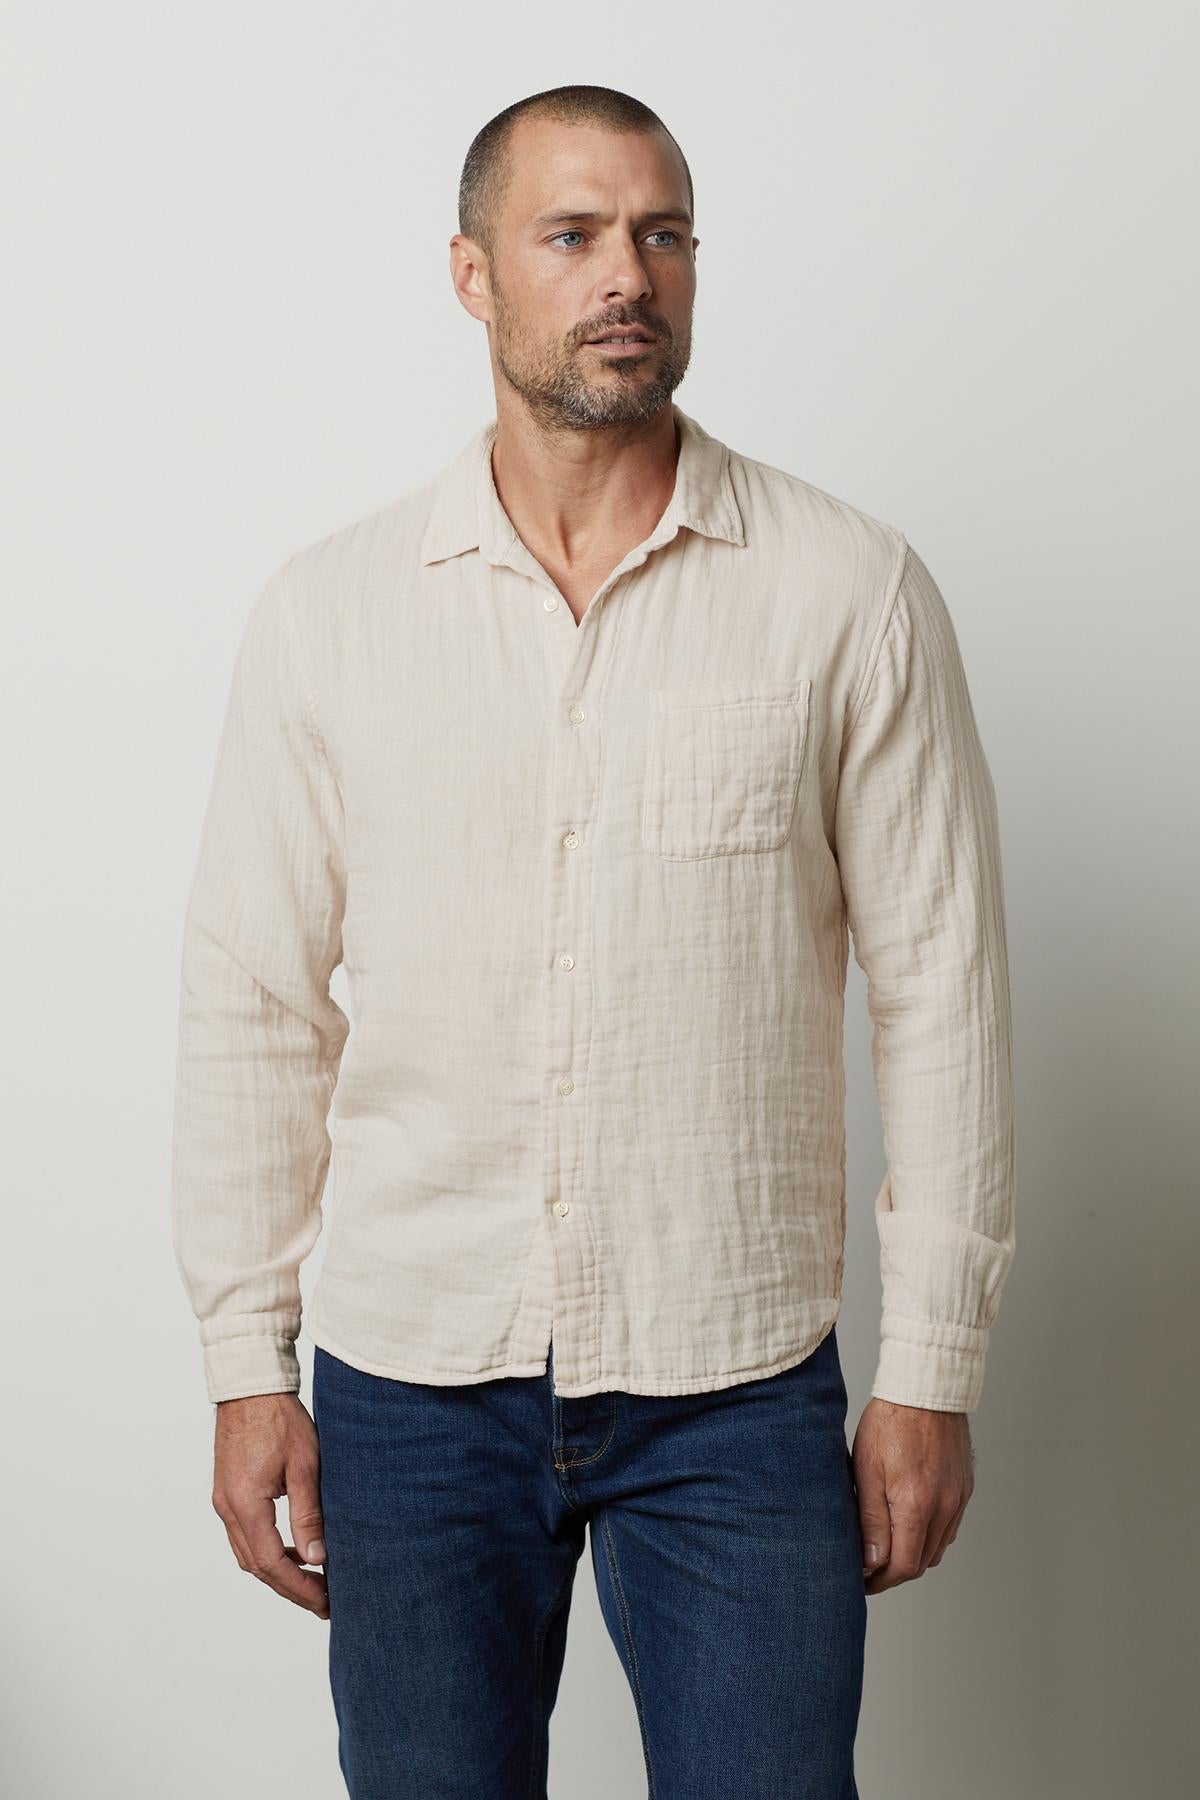   A man with a short beard wearing a Velvet by Graham & Spencer ELTON COTTON GAUZE BUTTON-UP SHIRT and jeans, standing against a plain white background, looks to the side thoughtfully. 